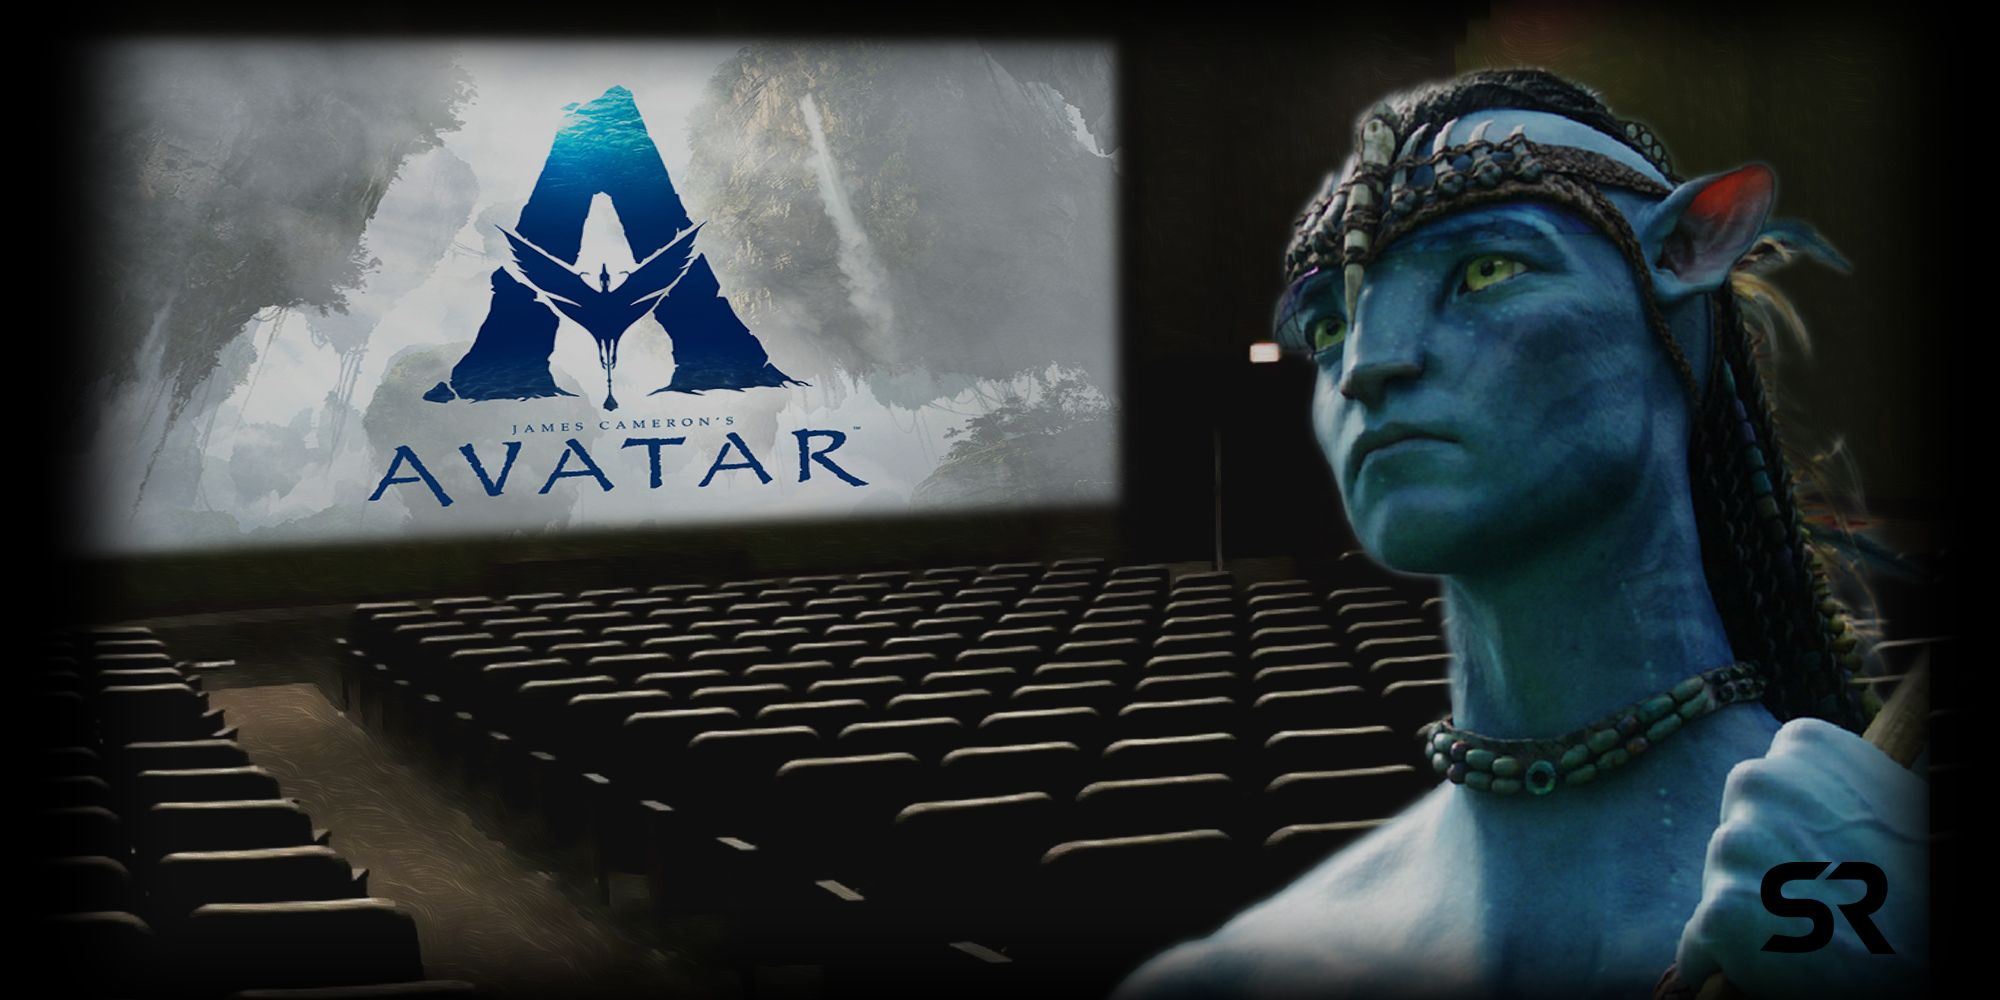 James Cameron More Concerned About Movie Theaters Than Avatar 2 Box